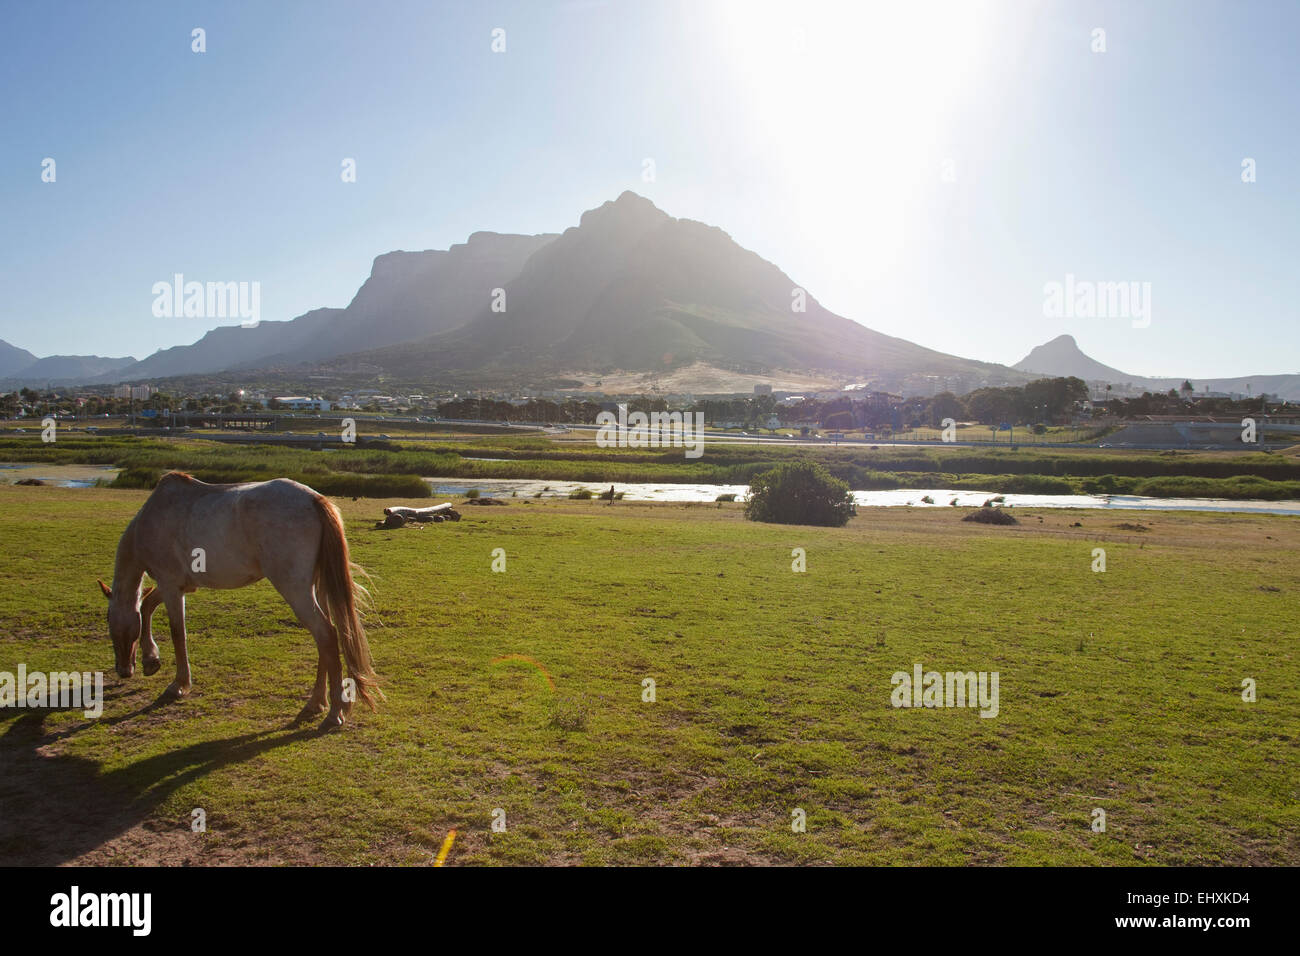 Side view of horse grazing on field, Table Mountain, South Africa, Cape Town Stock Photo